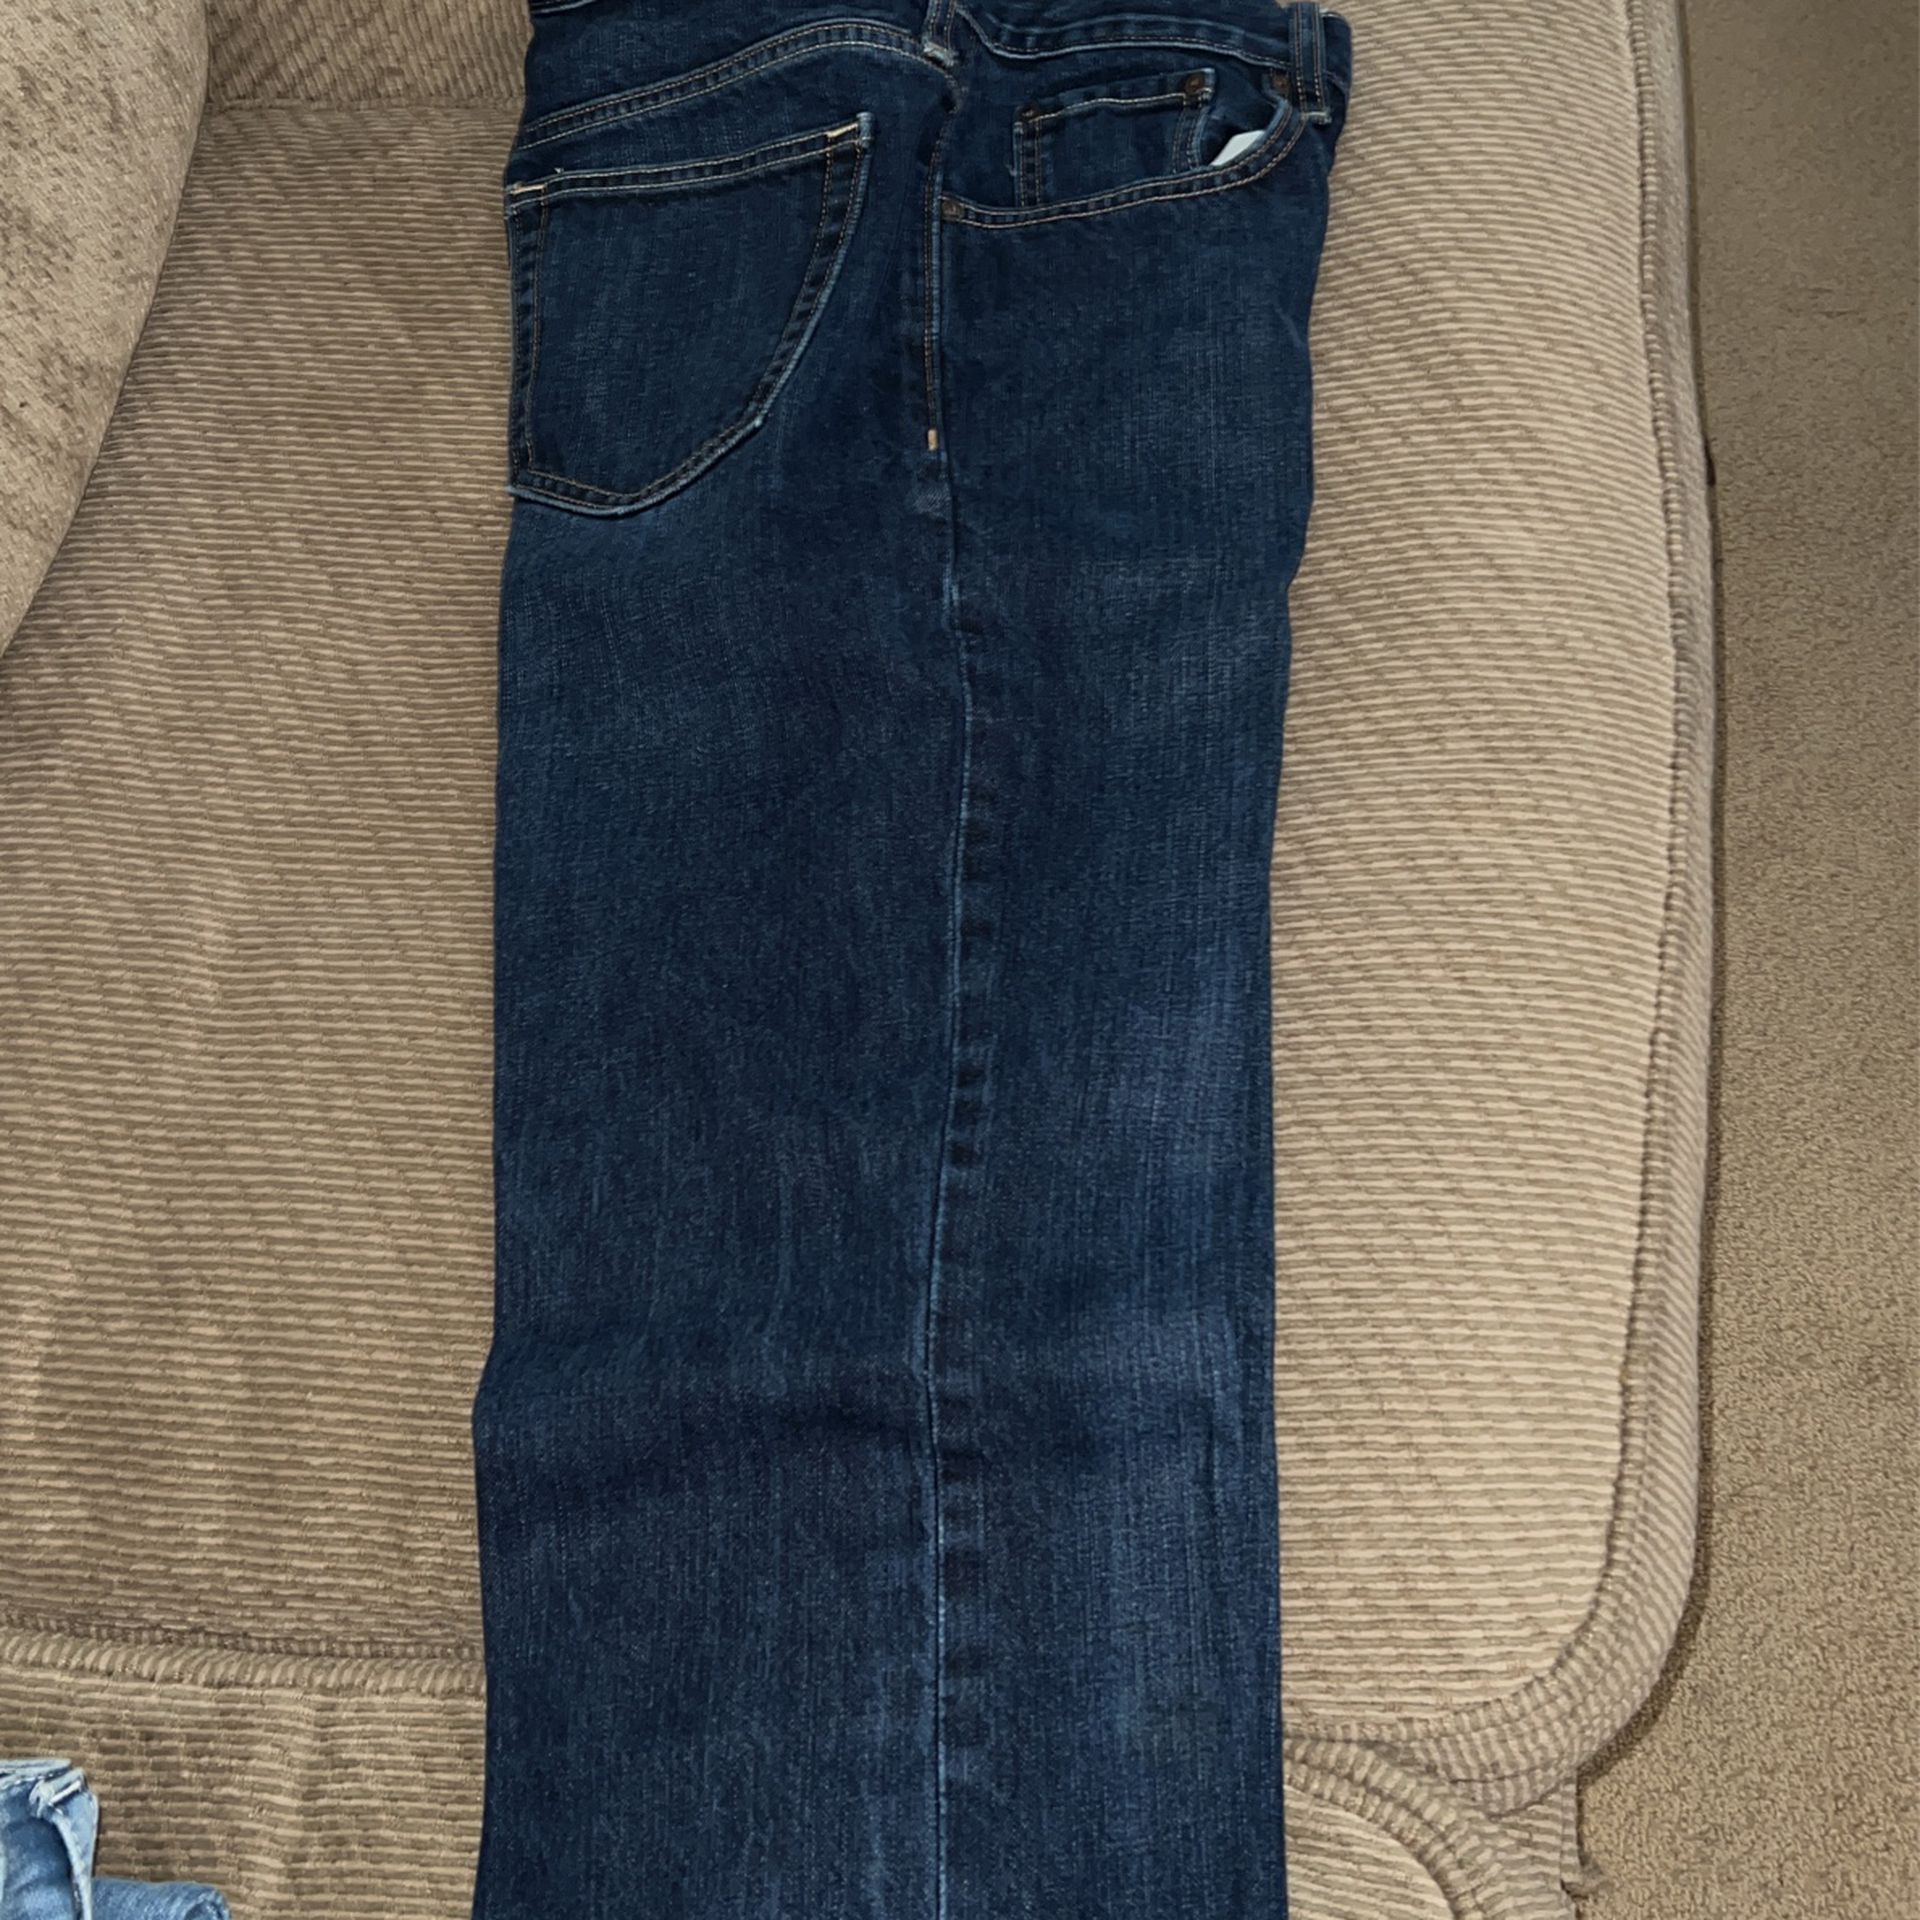 Men’s Old Navy Boot Cut Authentic Original Jeans Brand New $25